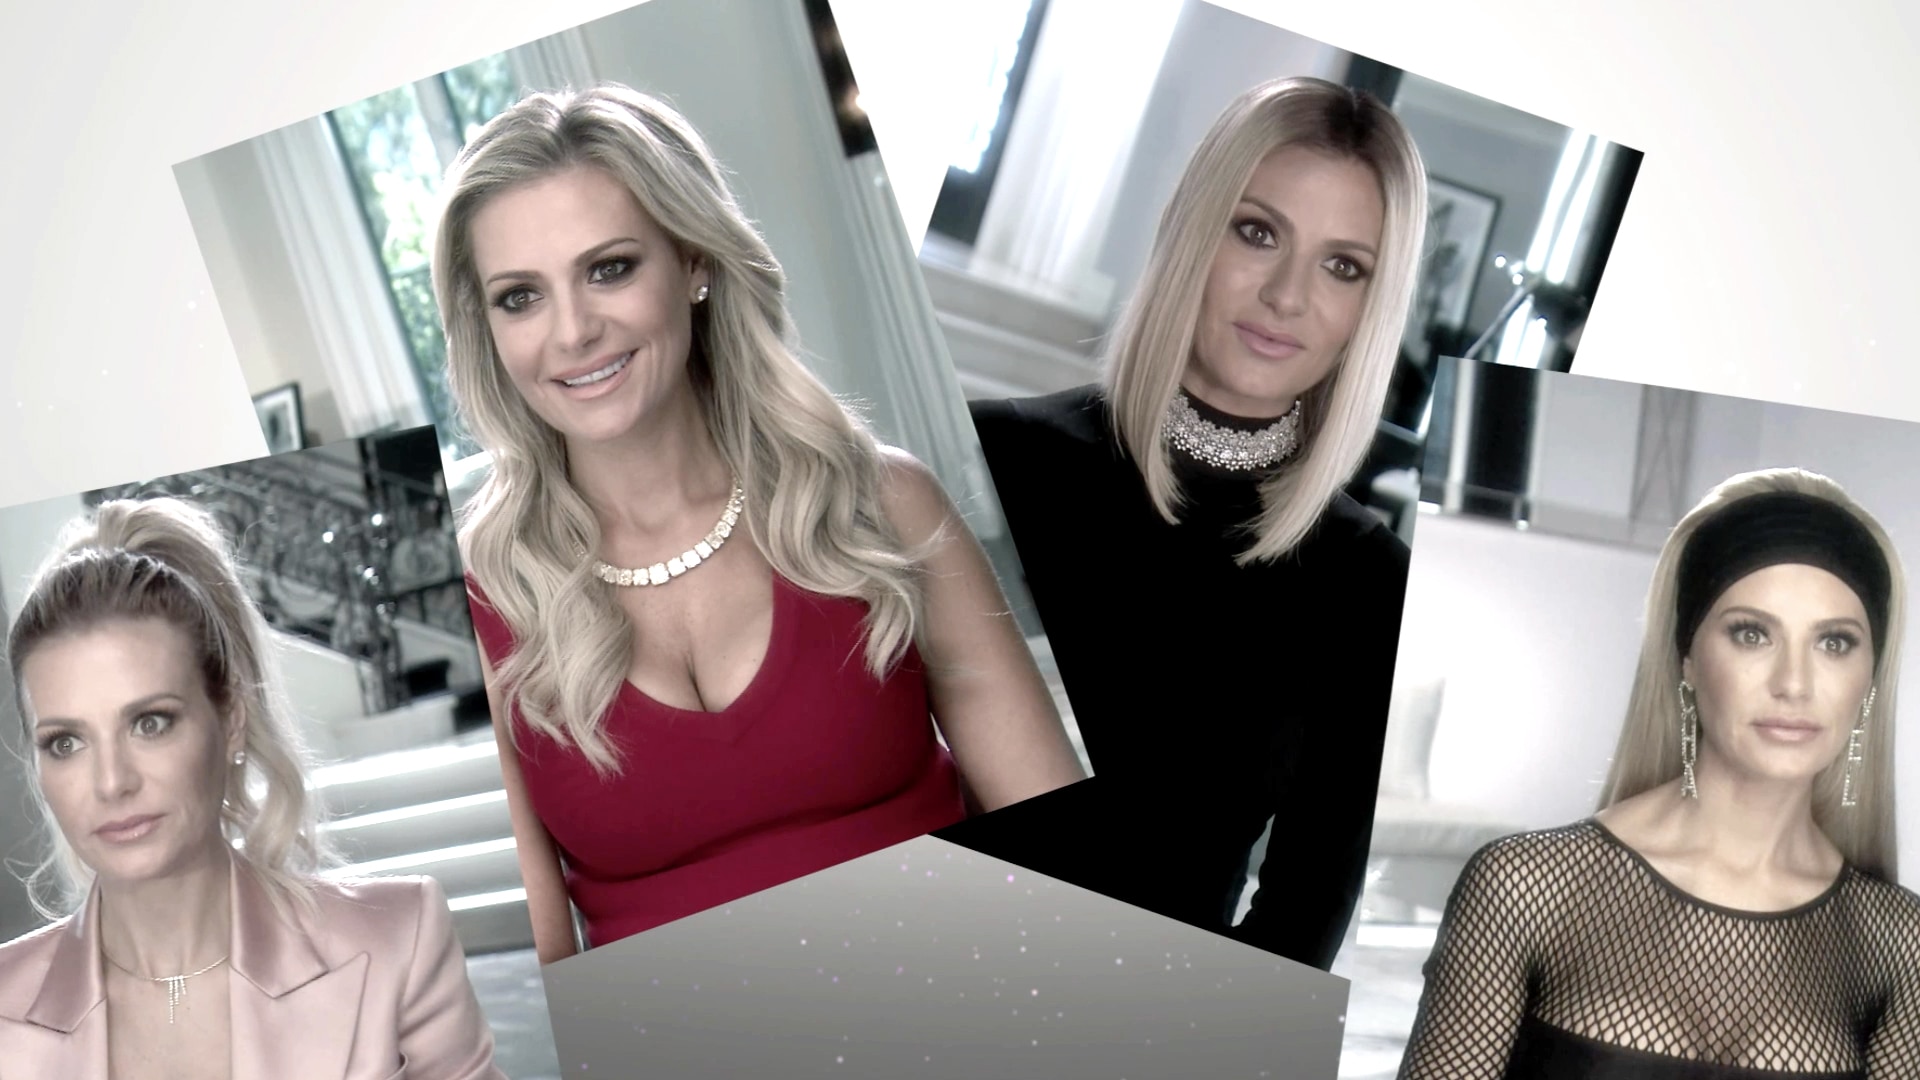 Dorit Kemsley The Real Housewives of Beverly Hills 11.05 June 16, 2021 –  Star Style